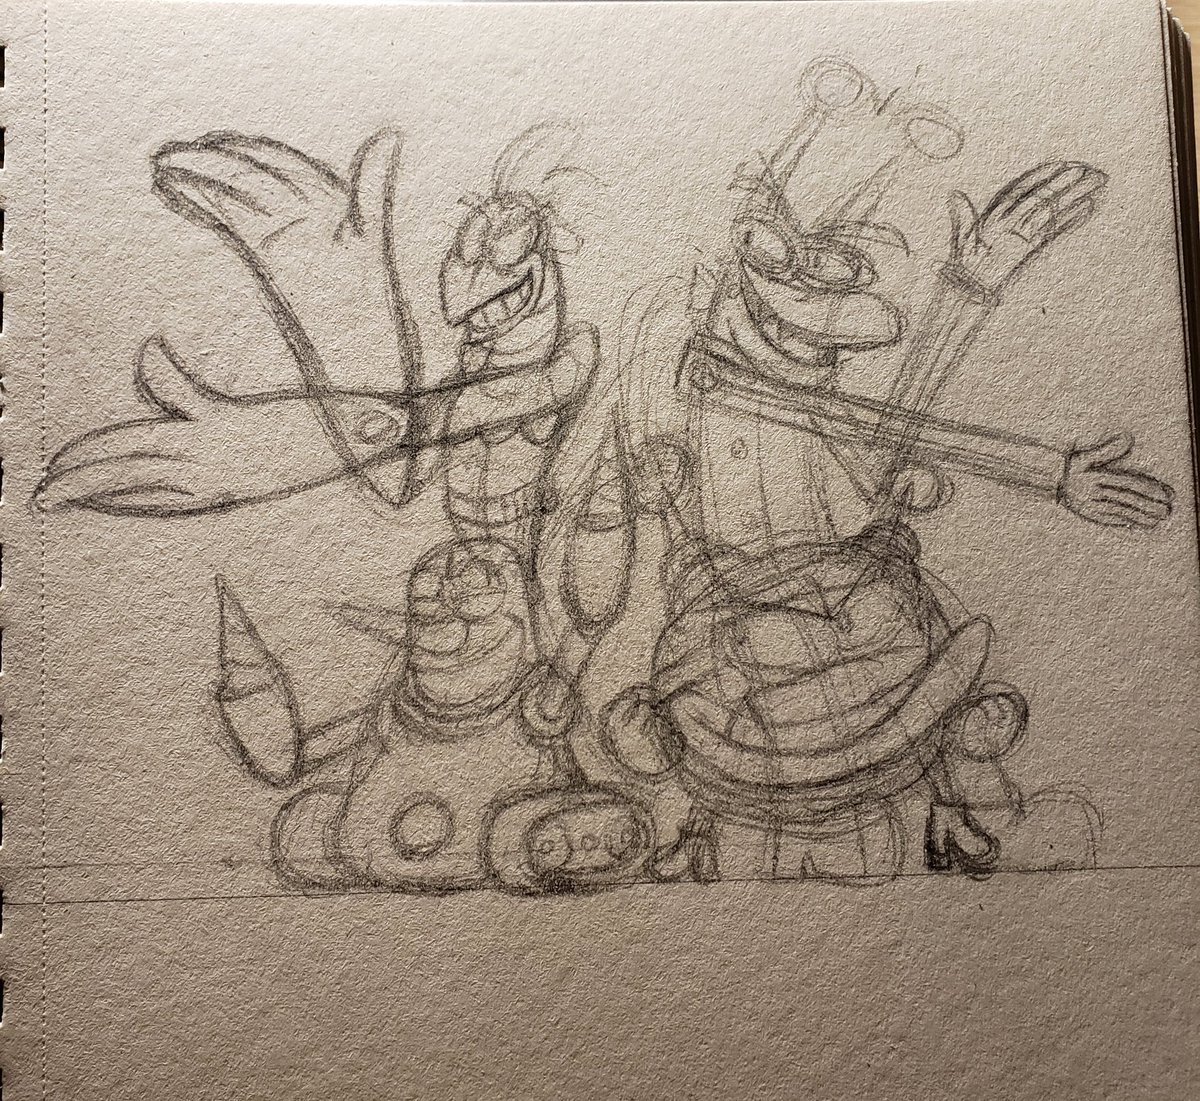 WIP

Scratch & Grounder I used their official art/refs/sprites from MBM to capture them accurately

Buzz & Delete I used official art & screencaps from Cyberchase. Mainly to get gestures and expressions down. I also made them big enough to match S&G cause they're pretty small. 